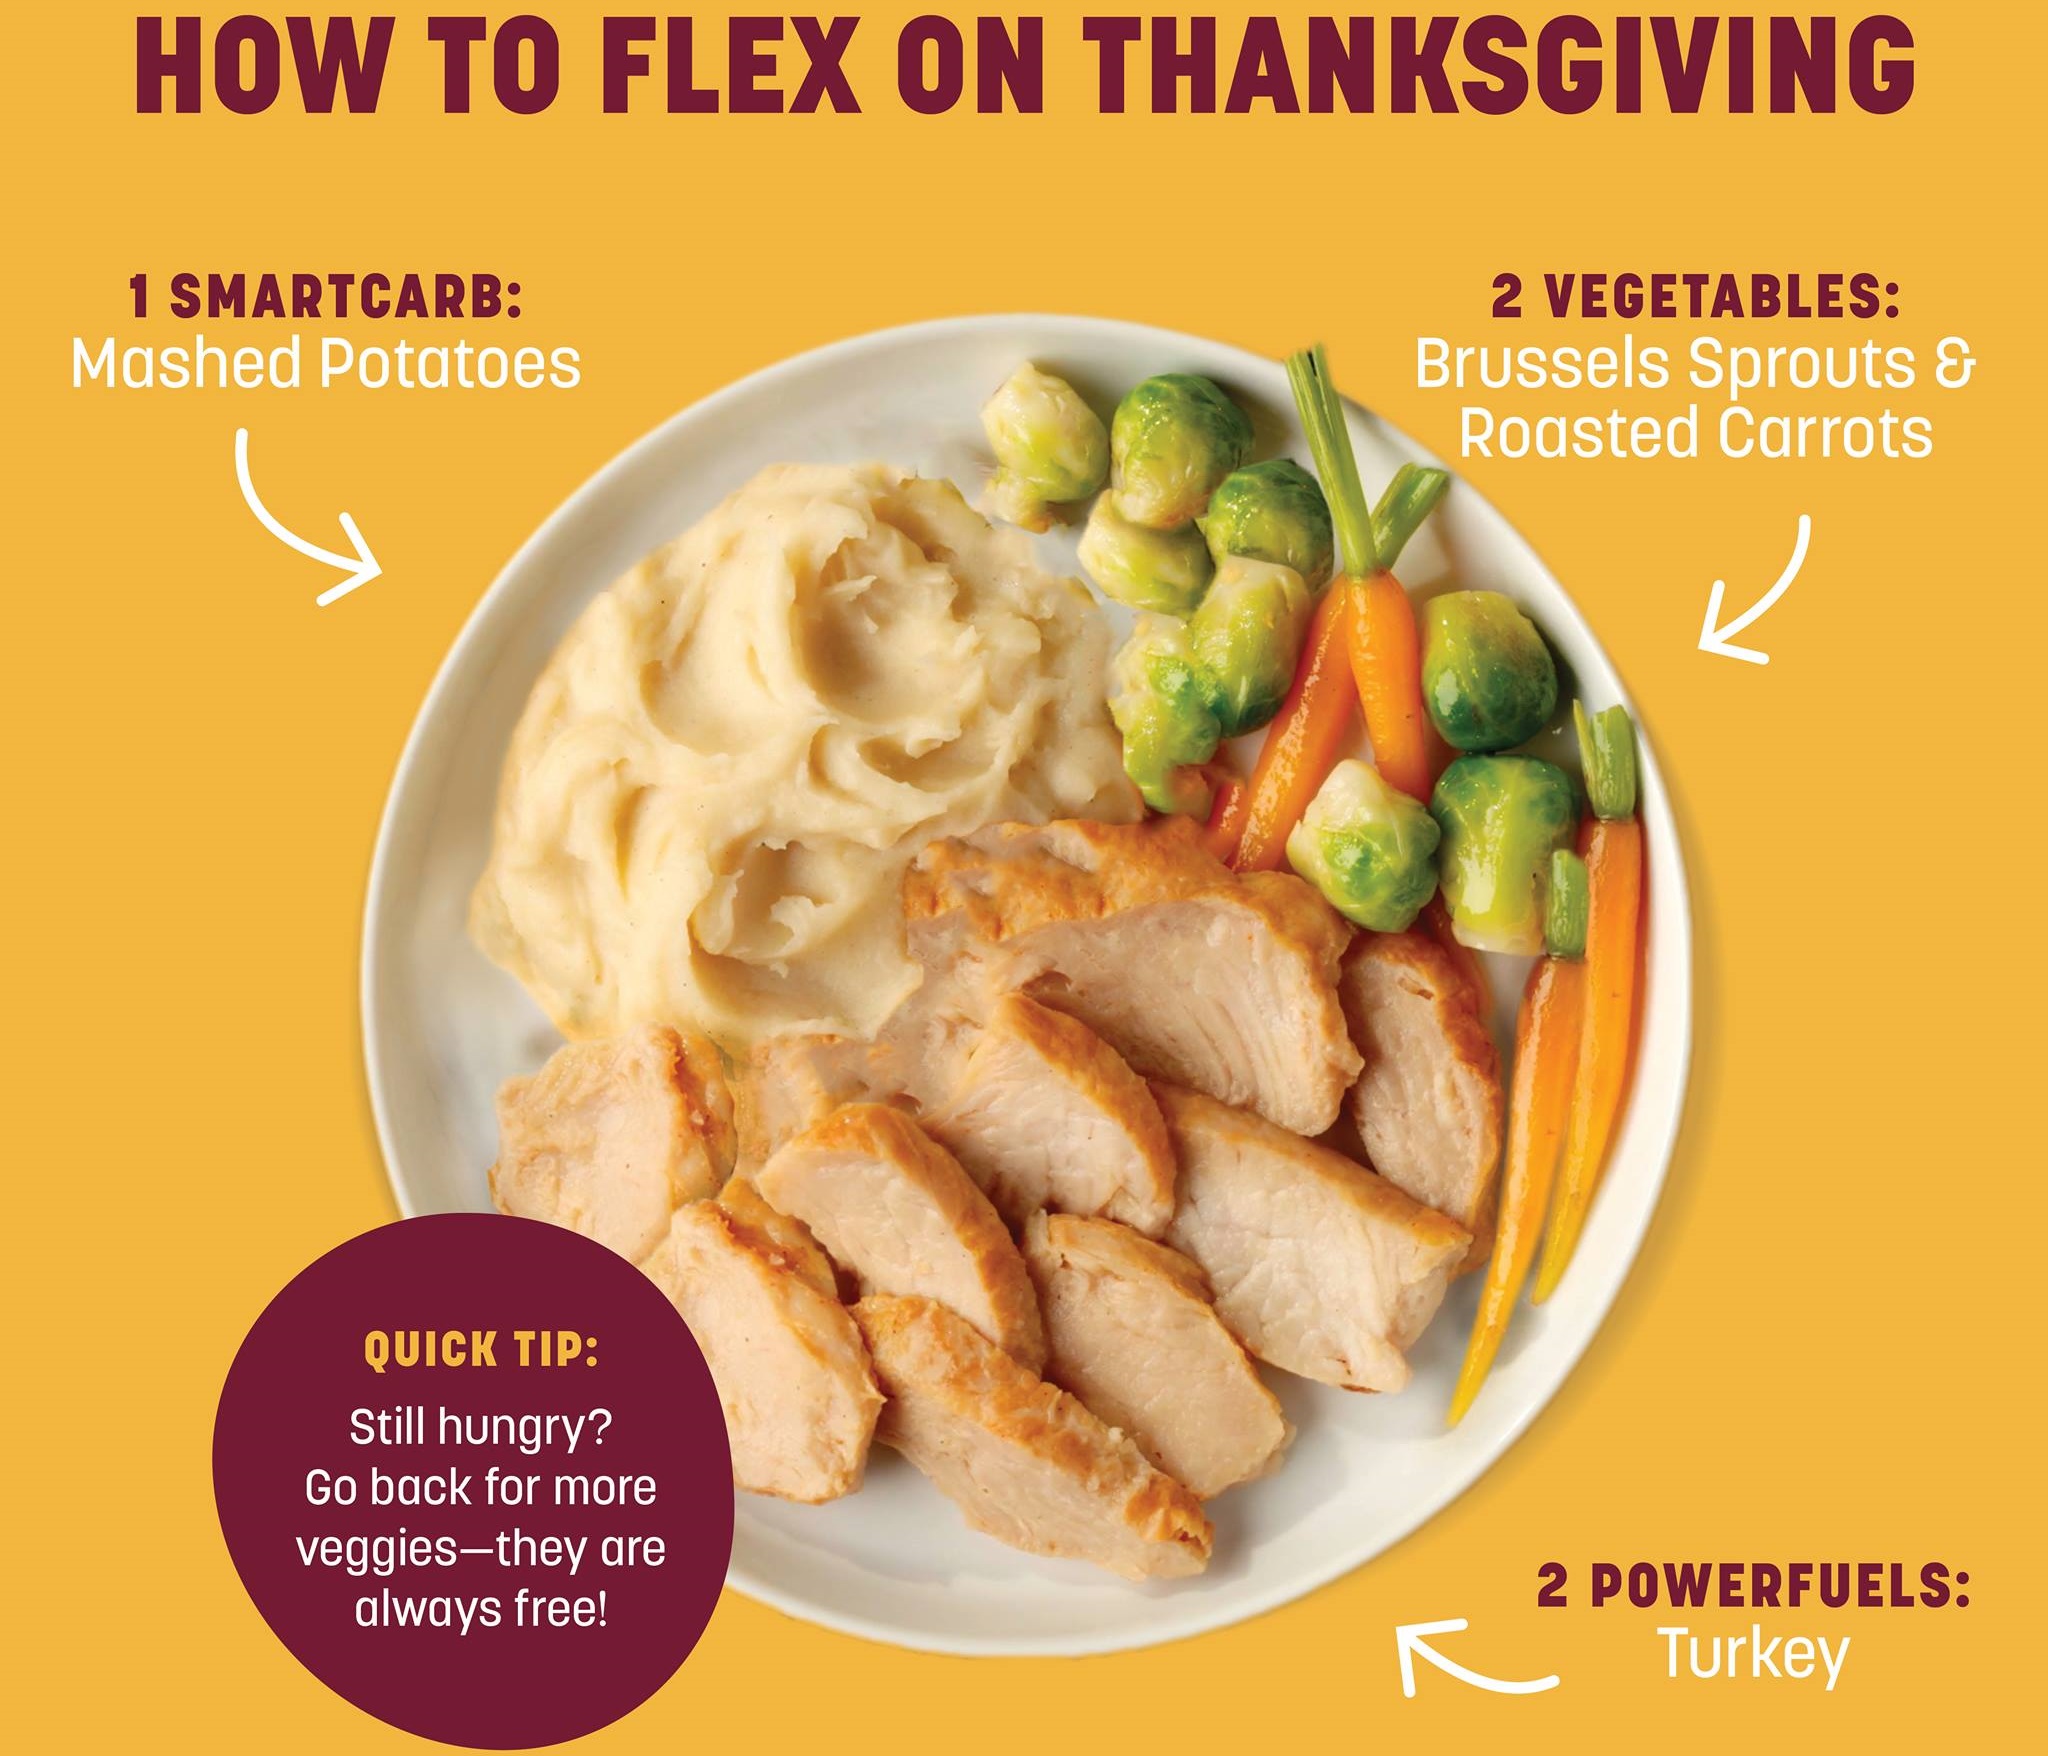 a healthy Thanksgiving plate Flex meal with turkey, mashed potatoes, brussels sprouts and carrots.